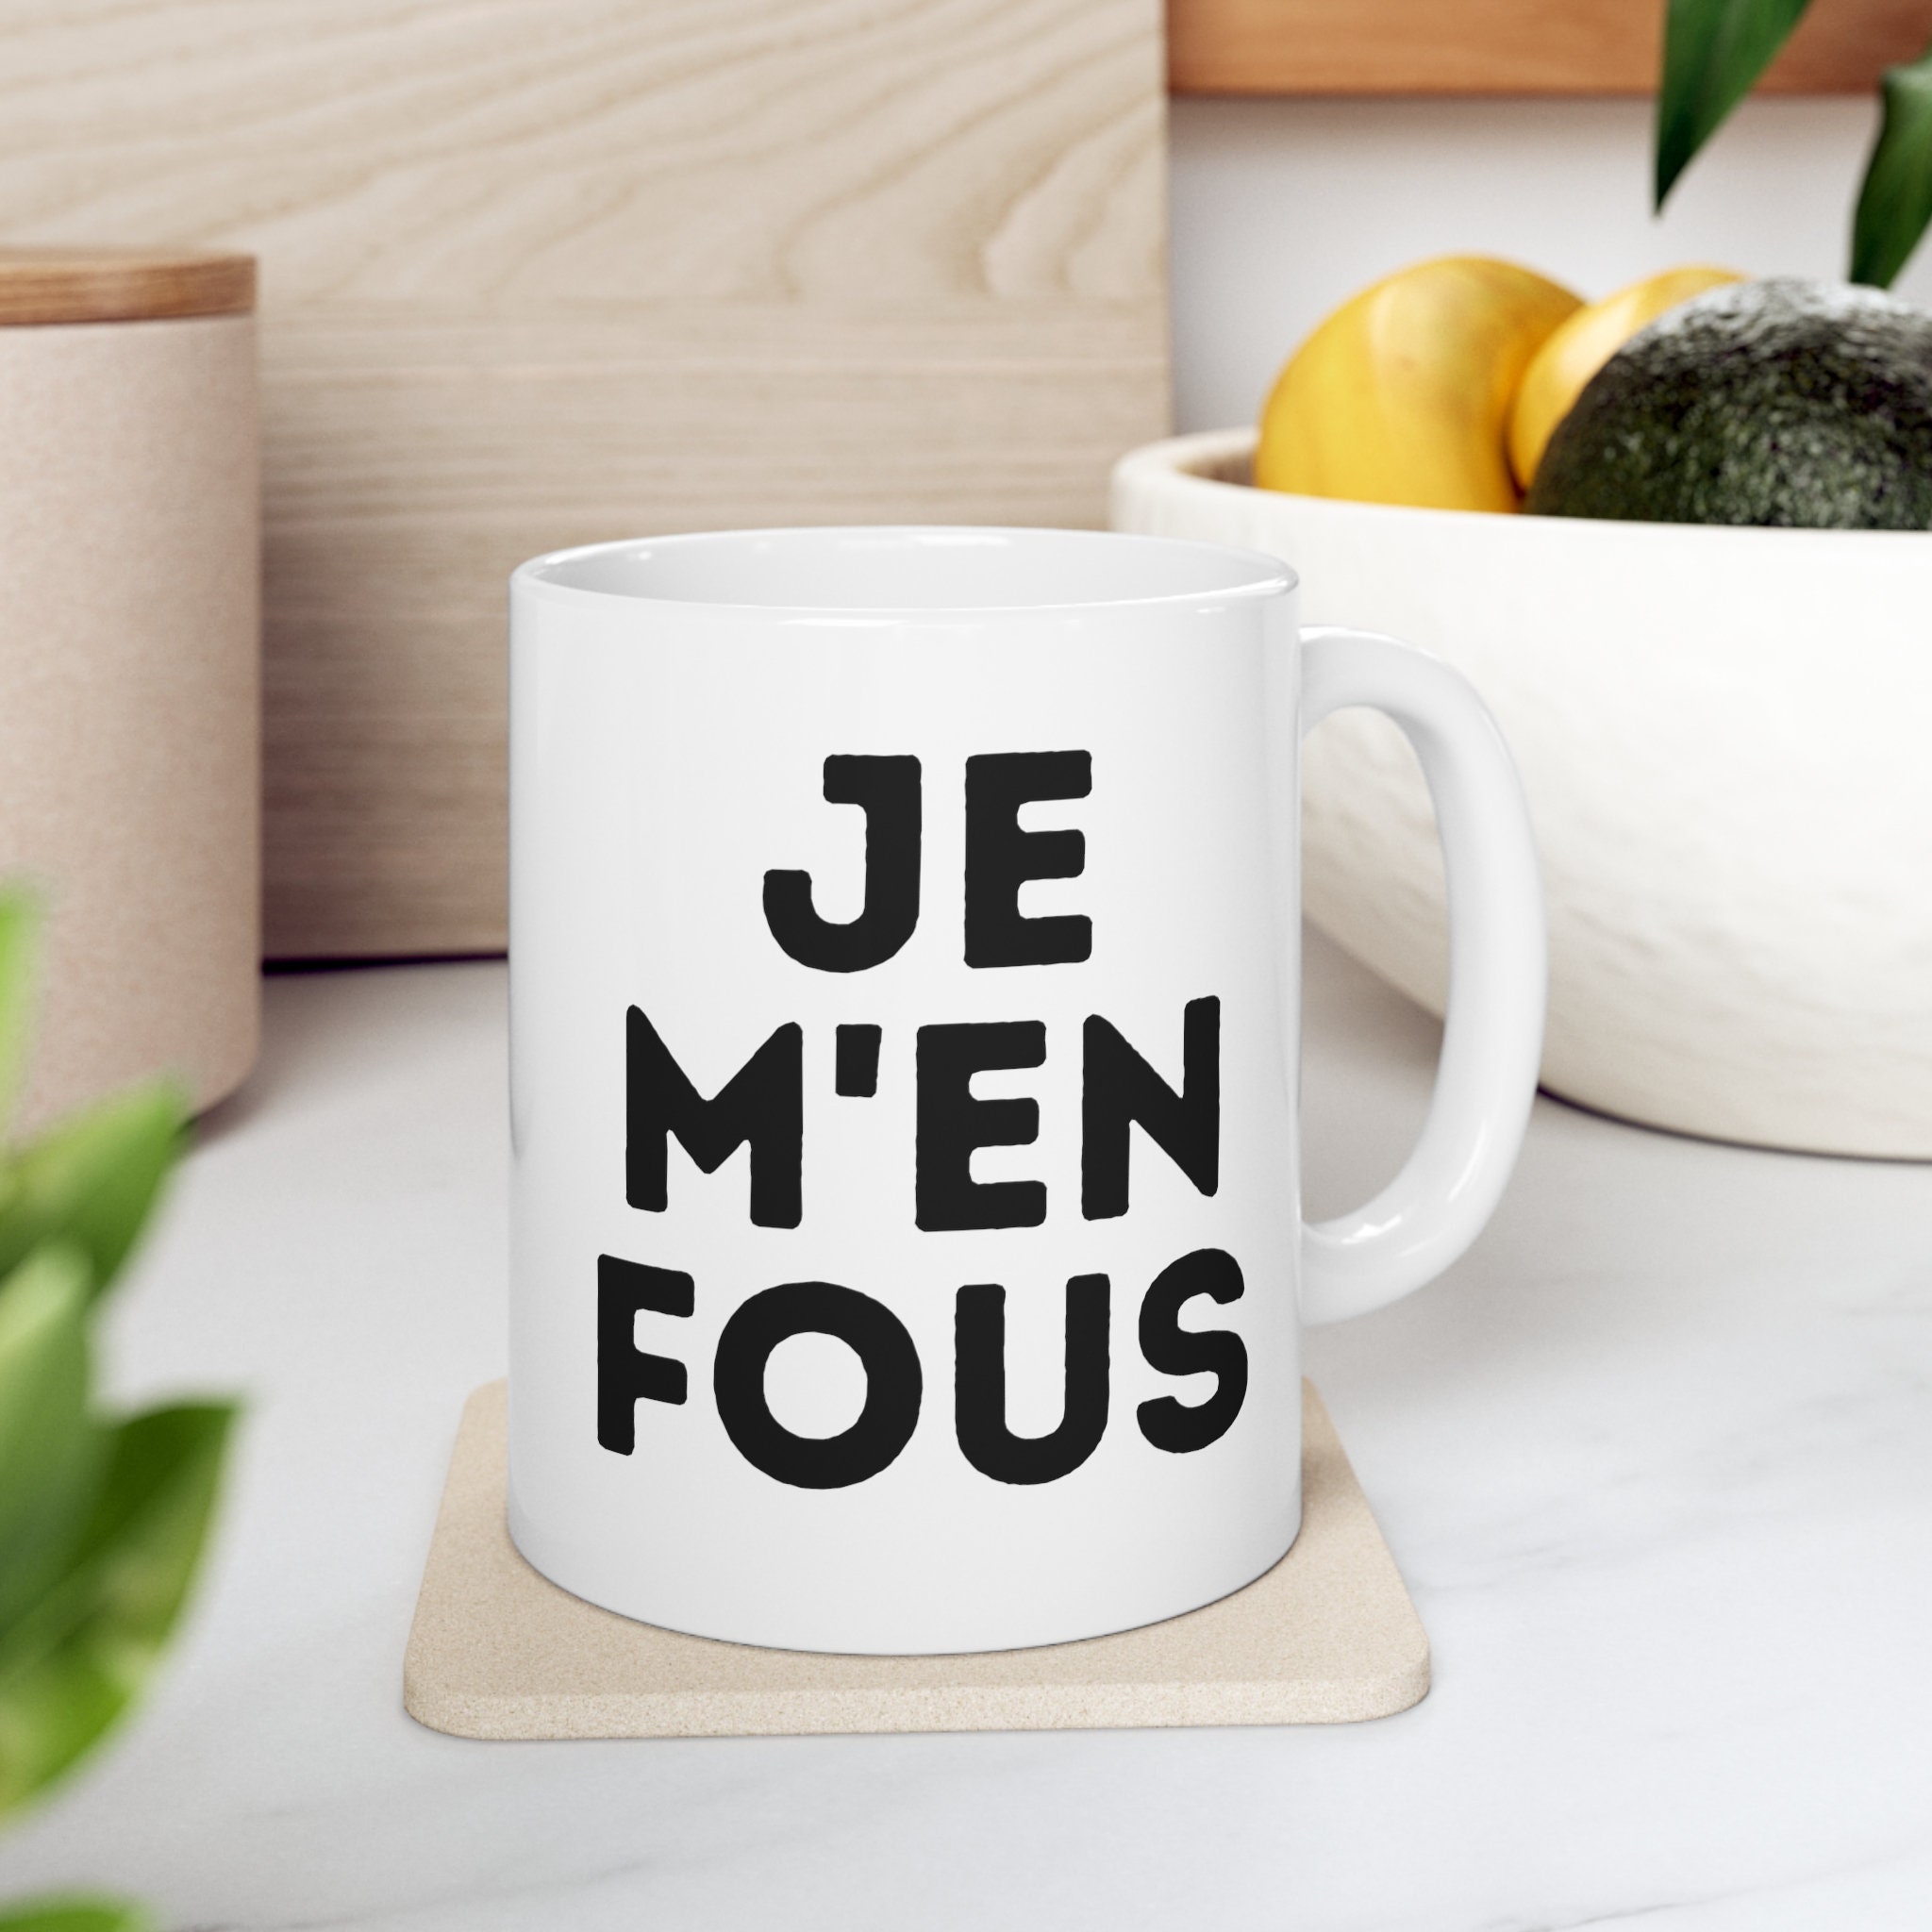 My Current Obsession: Double Wall Glass Coffee Mug Review - C'est Bien by  Heather Bien